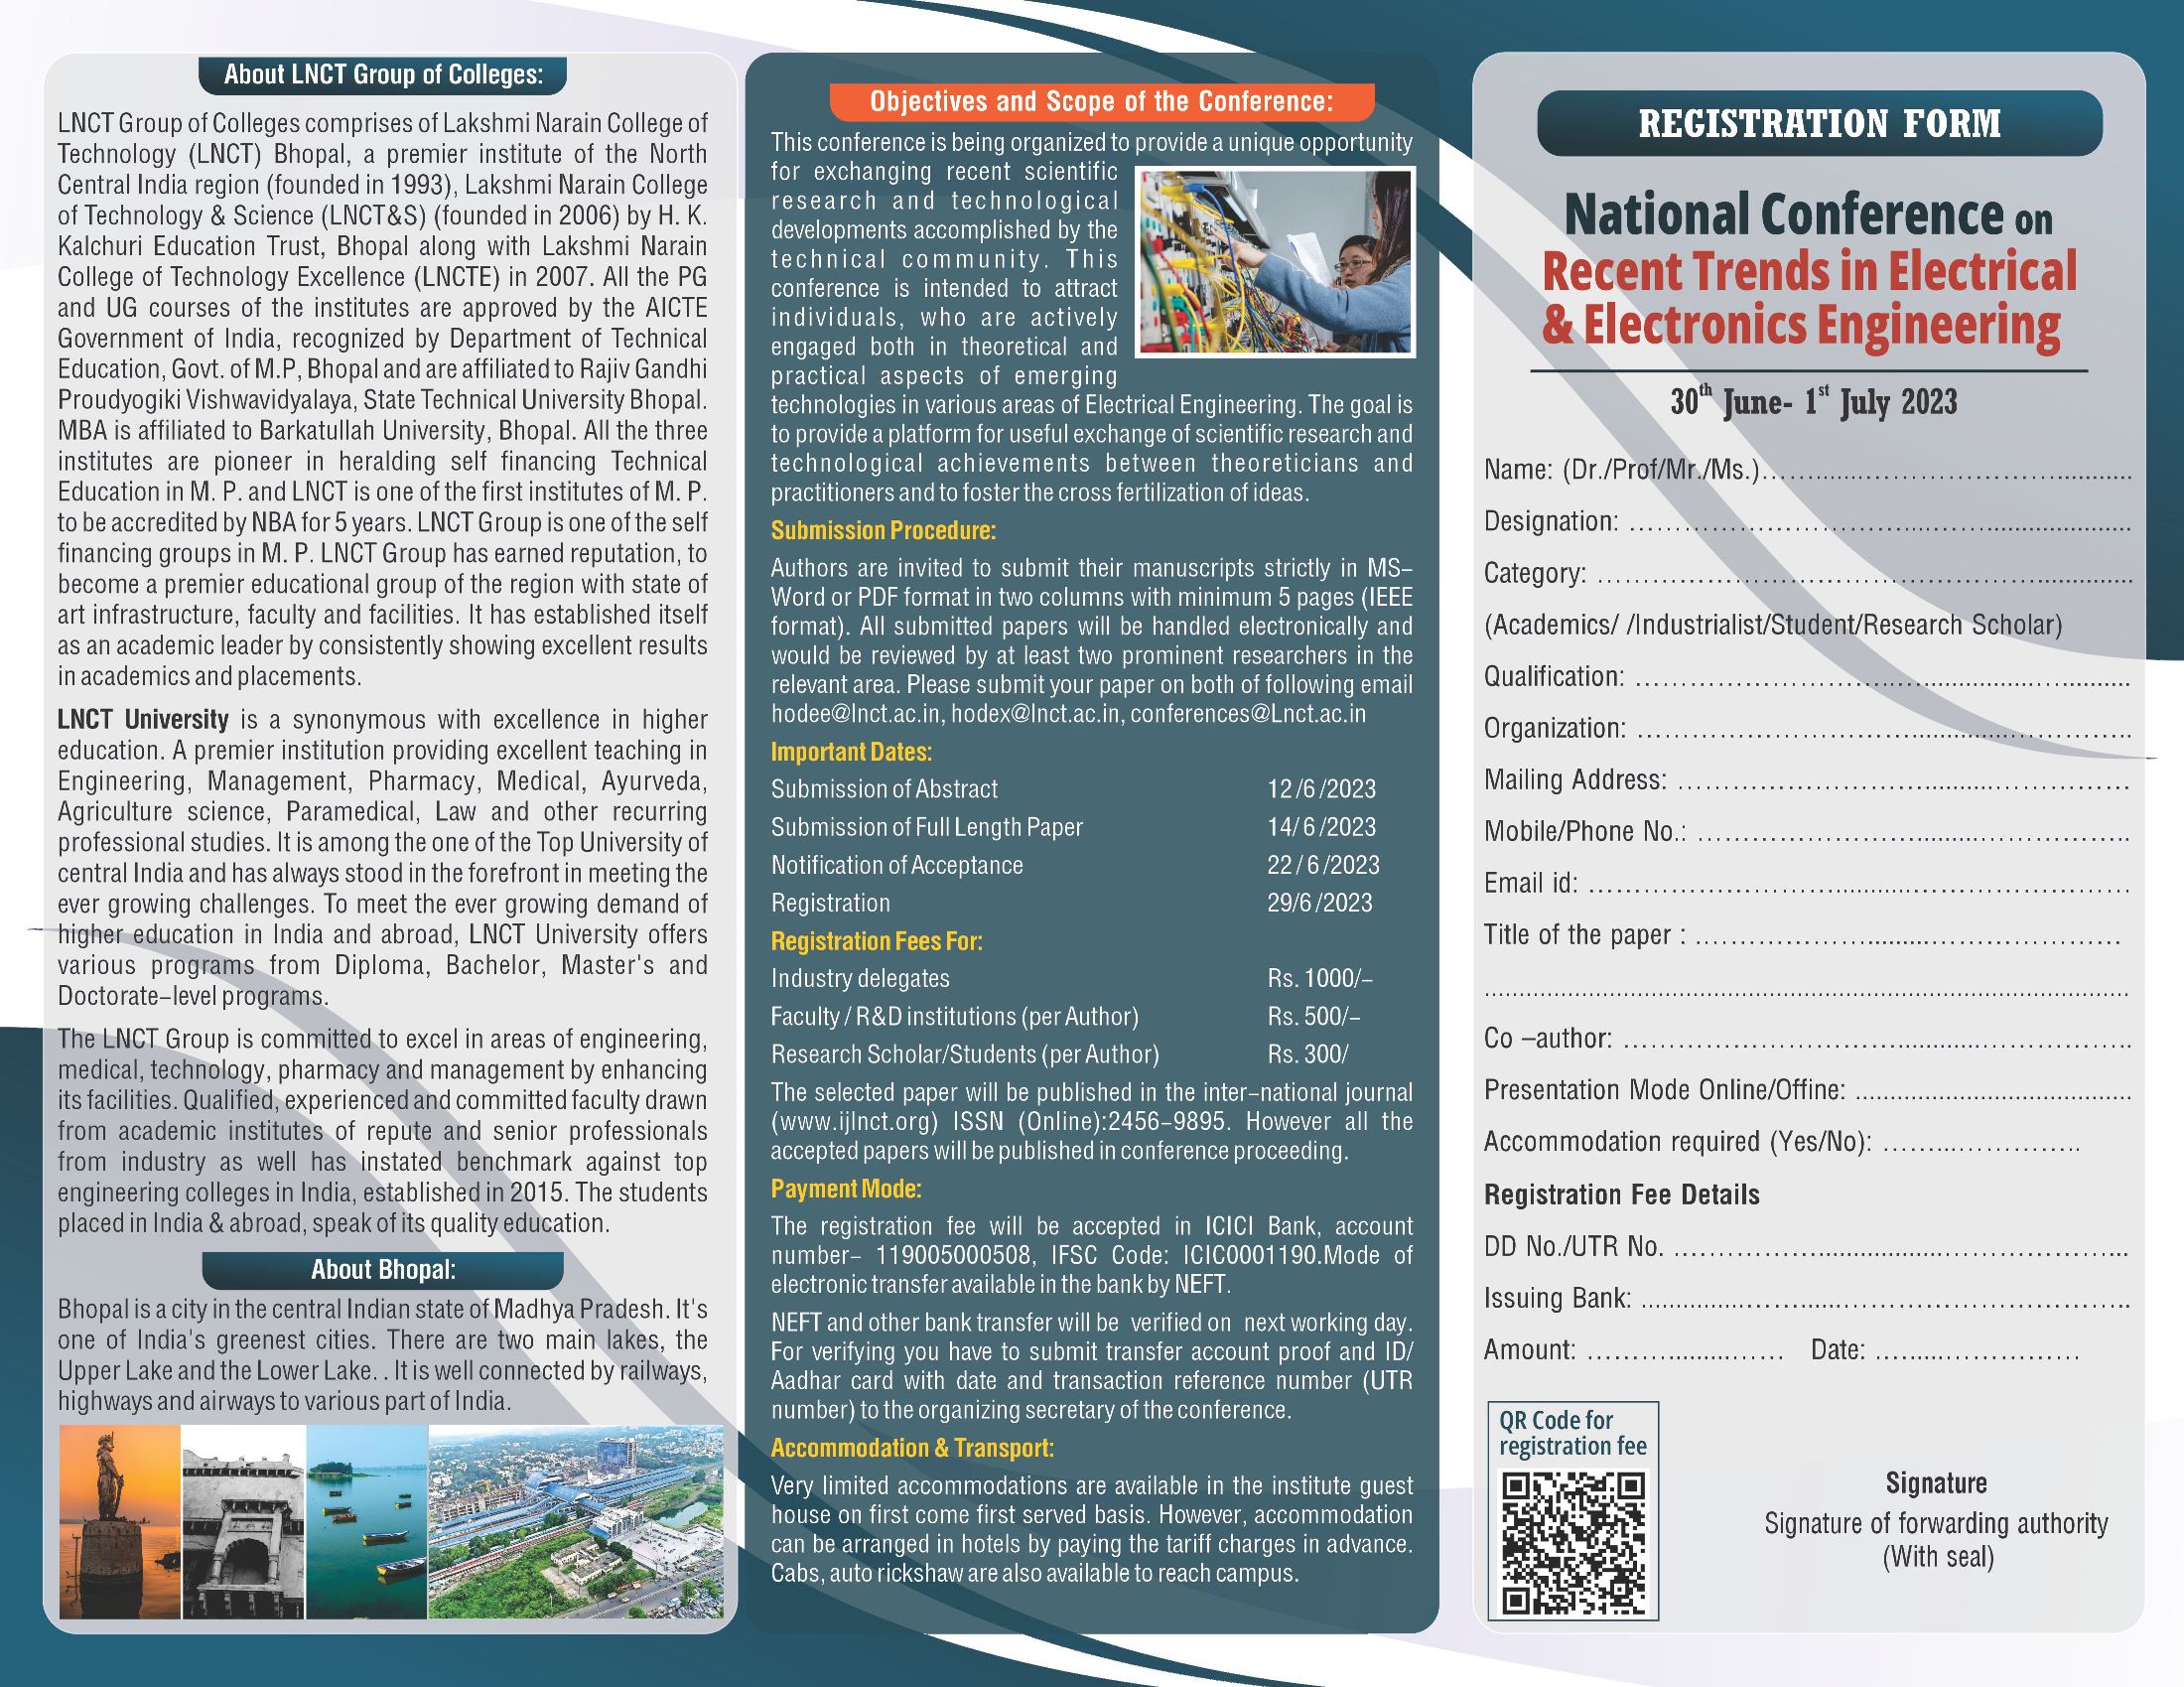 National Conference on Recent Trends in Electrical & Electronics Engineering 1